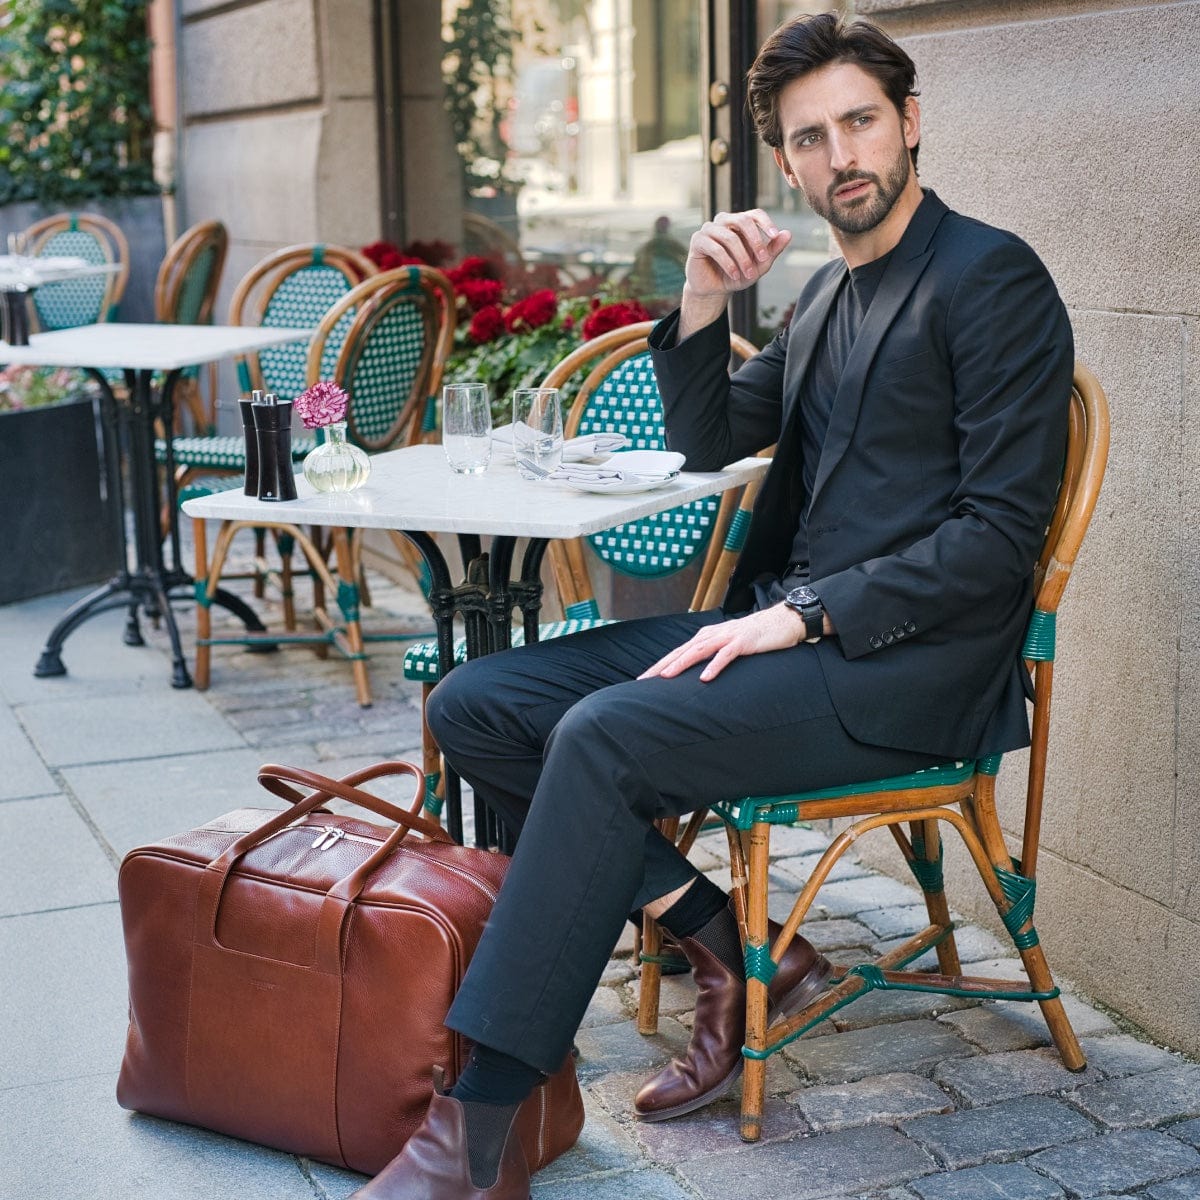 The Arsante Weekend Bag is a stylish, durable, and luxurious carry-on bag, designed to fit all airline cabin sizes.